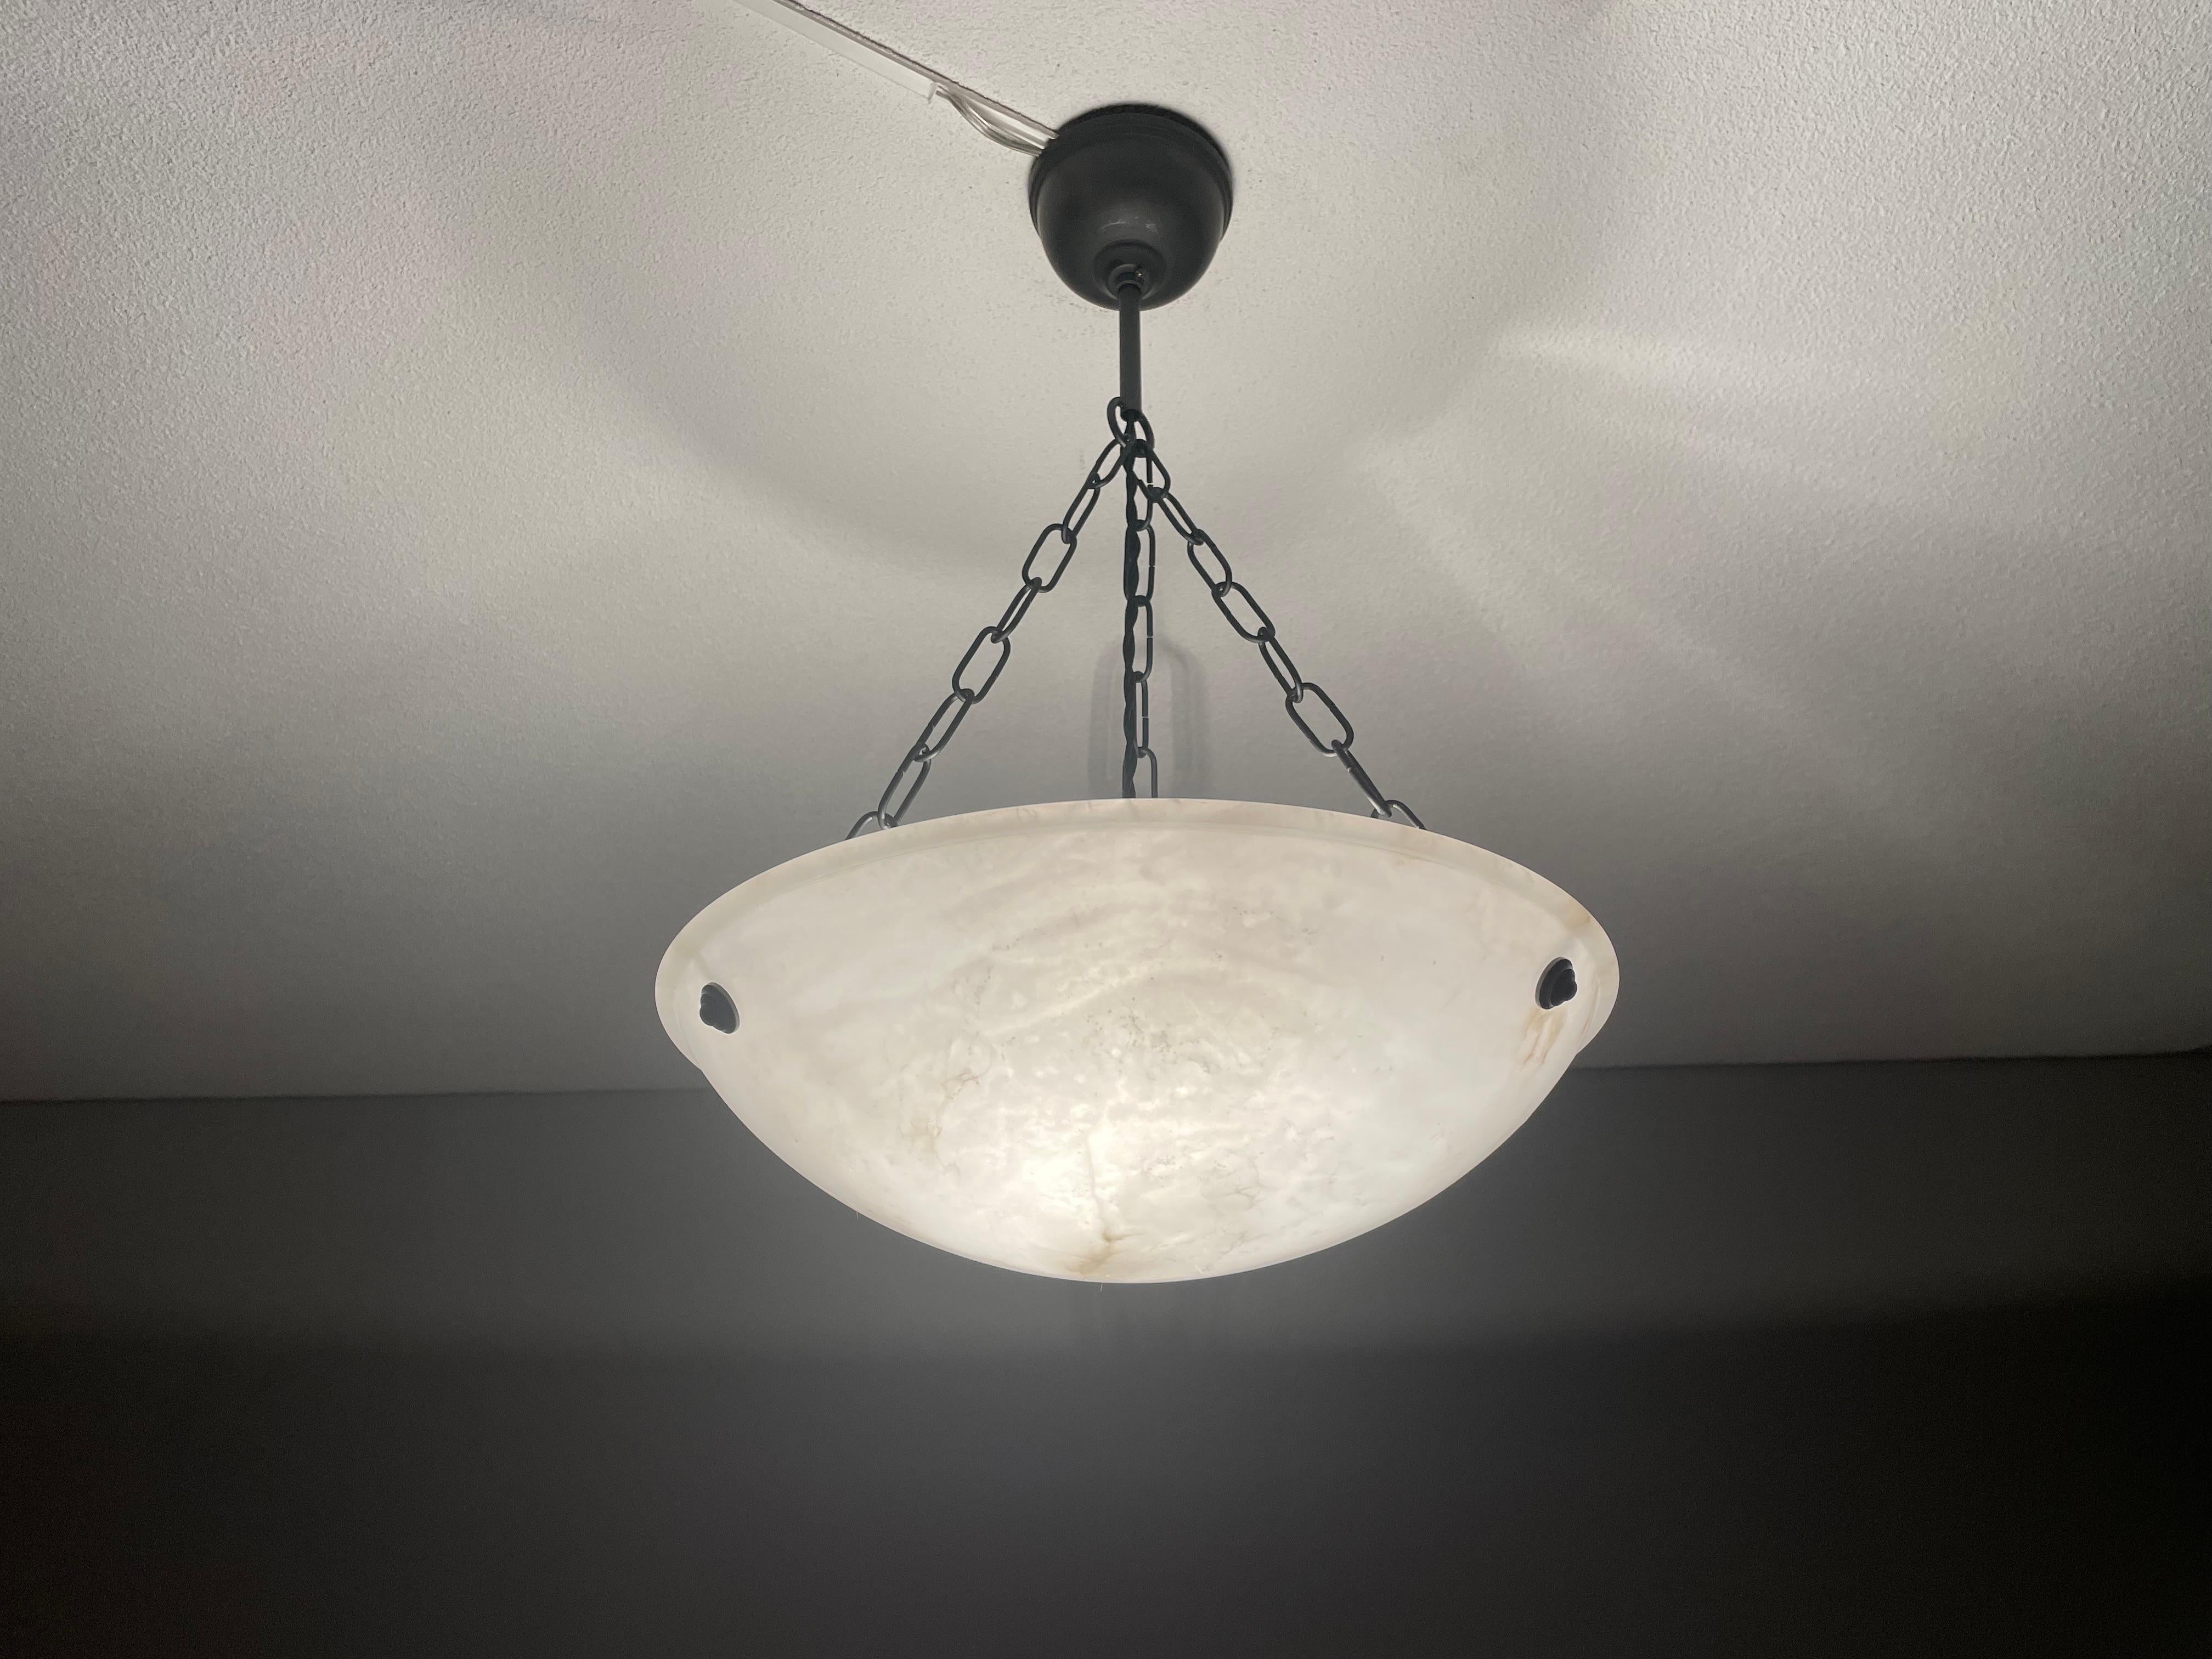 Lovely antique light fixture for an entry hall, bedroom or any other small room.

With early 20th century light fixtures being one of our specialities, we always love finding timeless pendant lights and flush mounts. This particular work of beauty